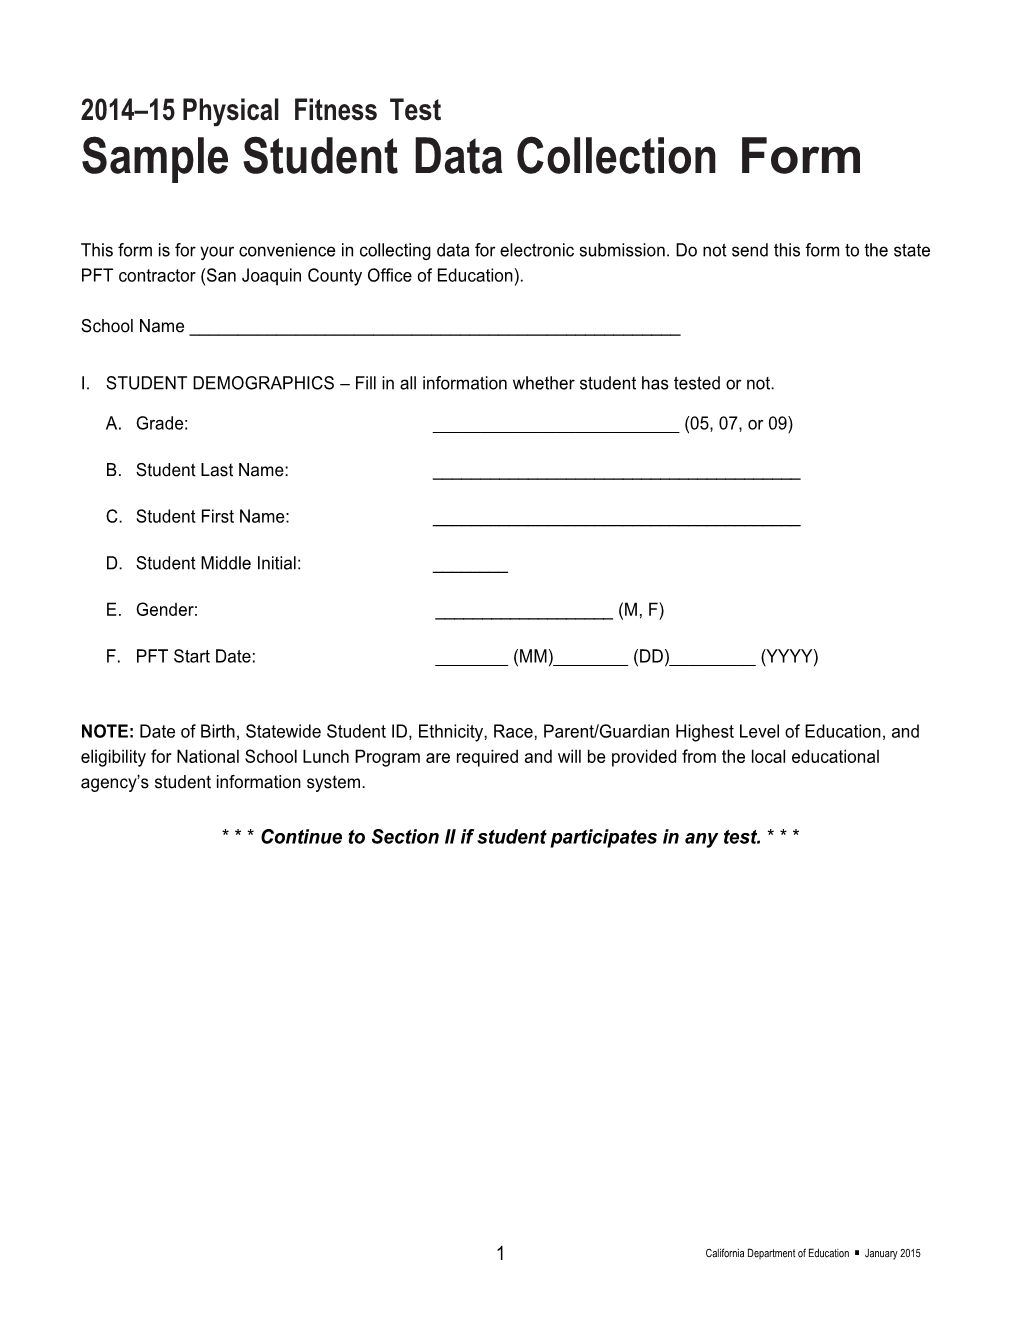 Sample Student Data Collection Form